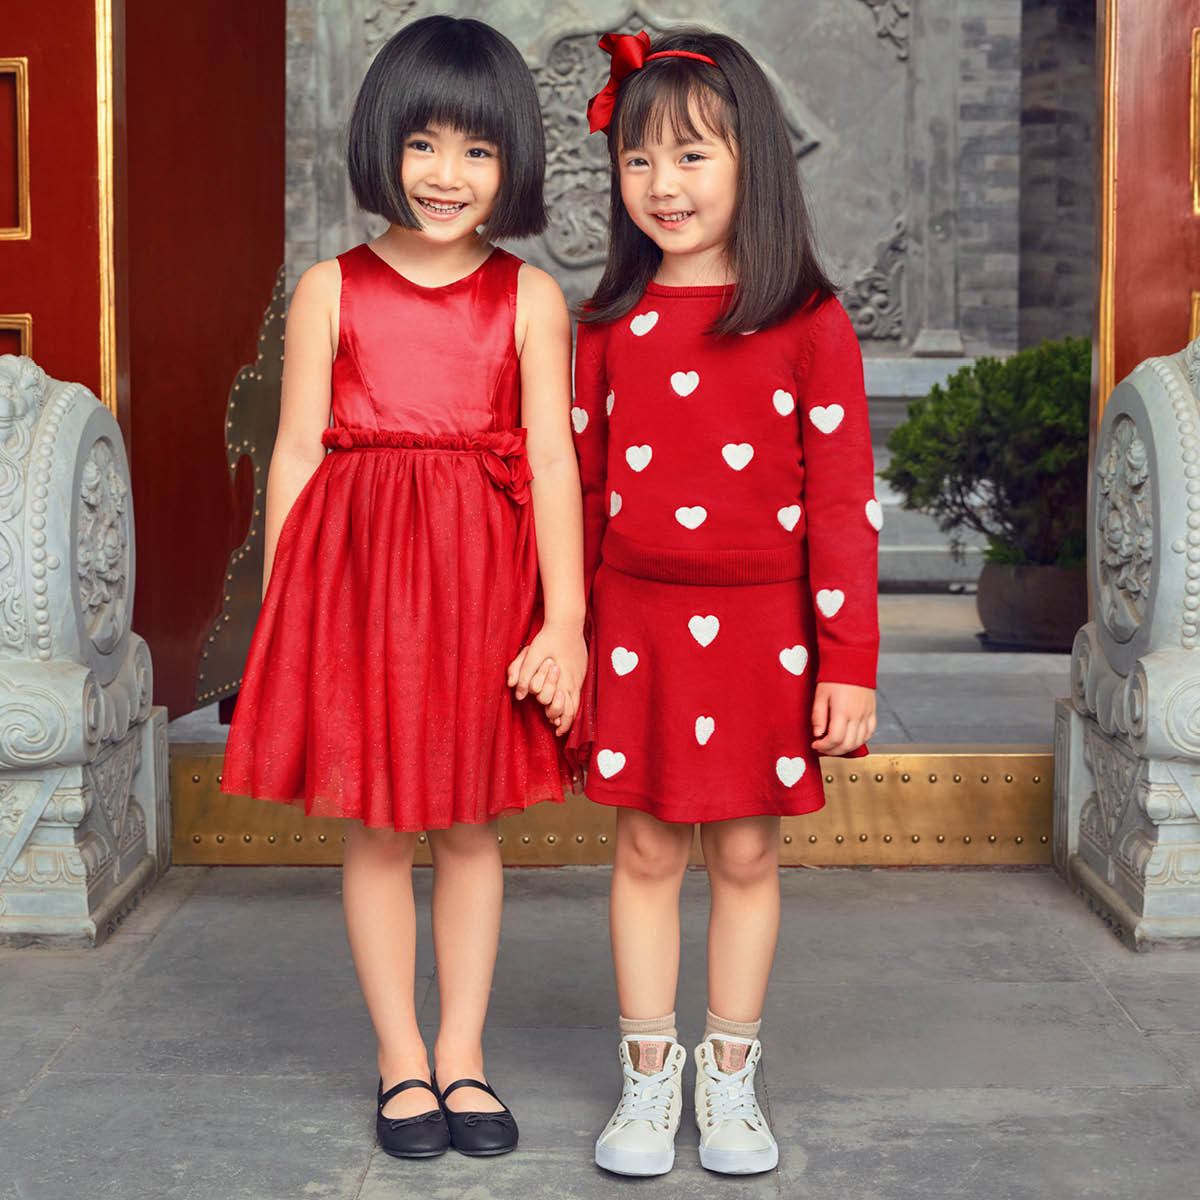 H&M Kids Clothes are Perfect for the Weekend - When In Manila